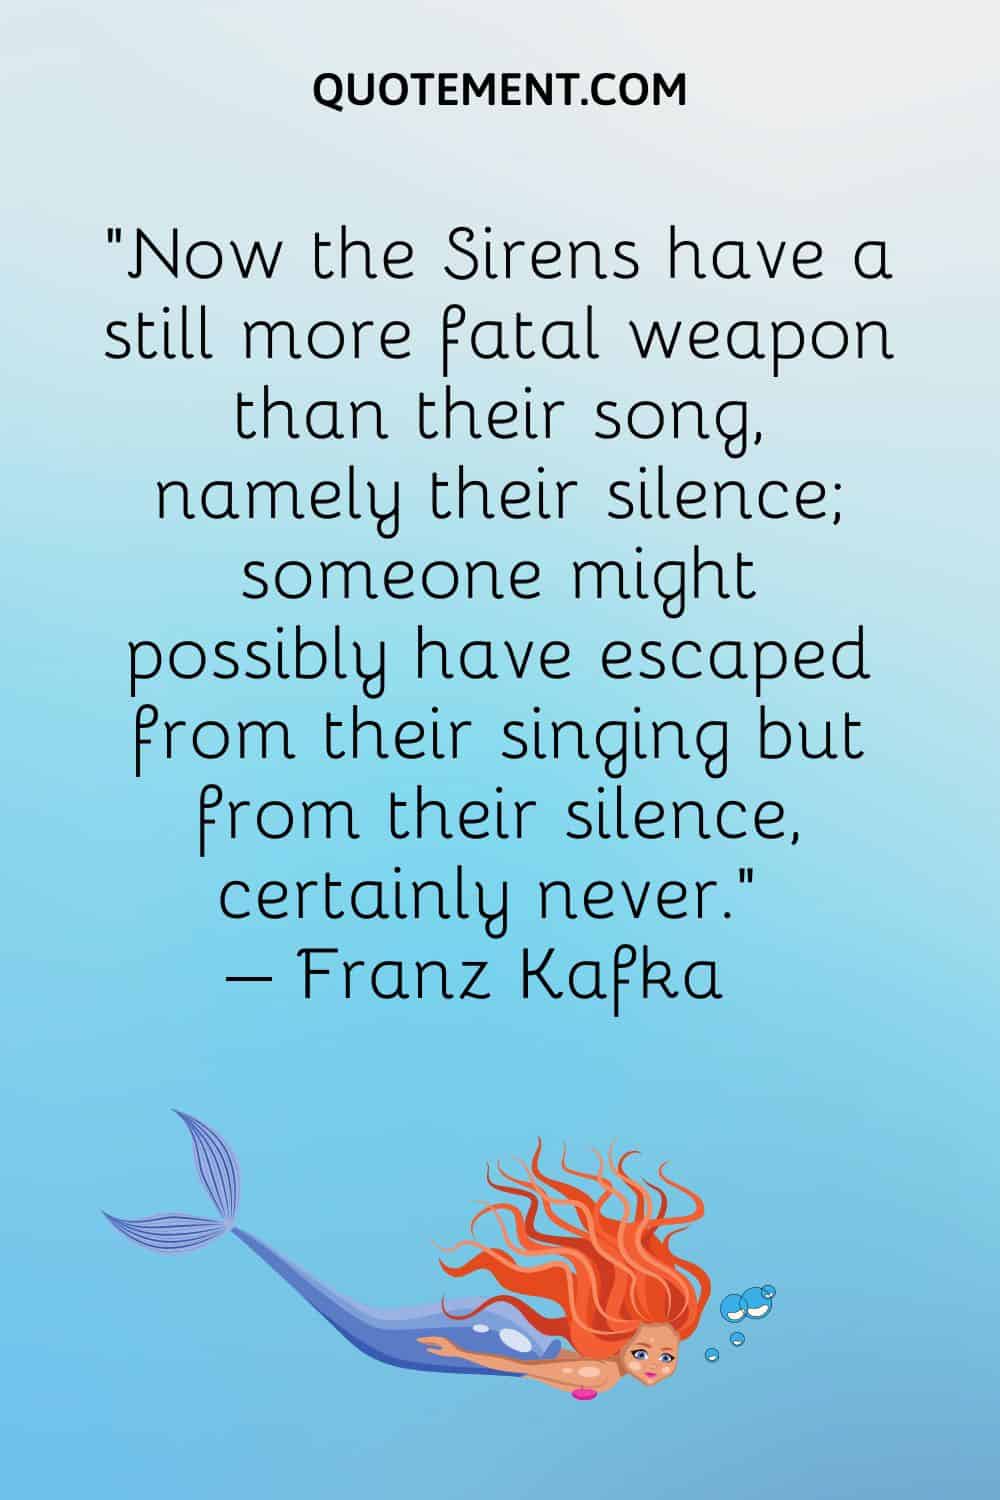 “Now the Sirens have a still more fatal weapon than their song, namely their silence; someone might possibly have escaped from their singing but from their silence, certainly never.” – Franz Kafka